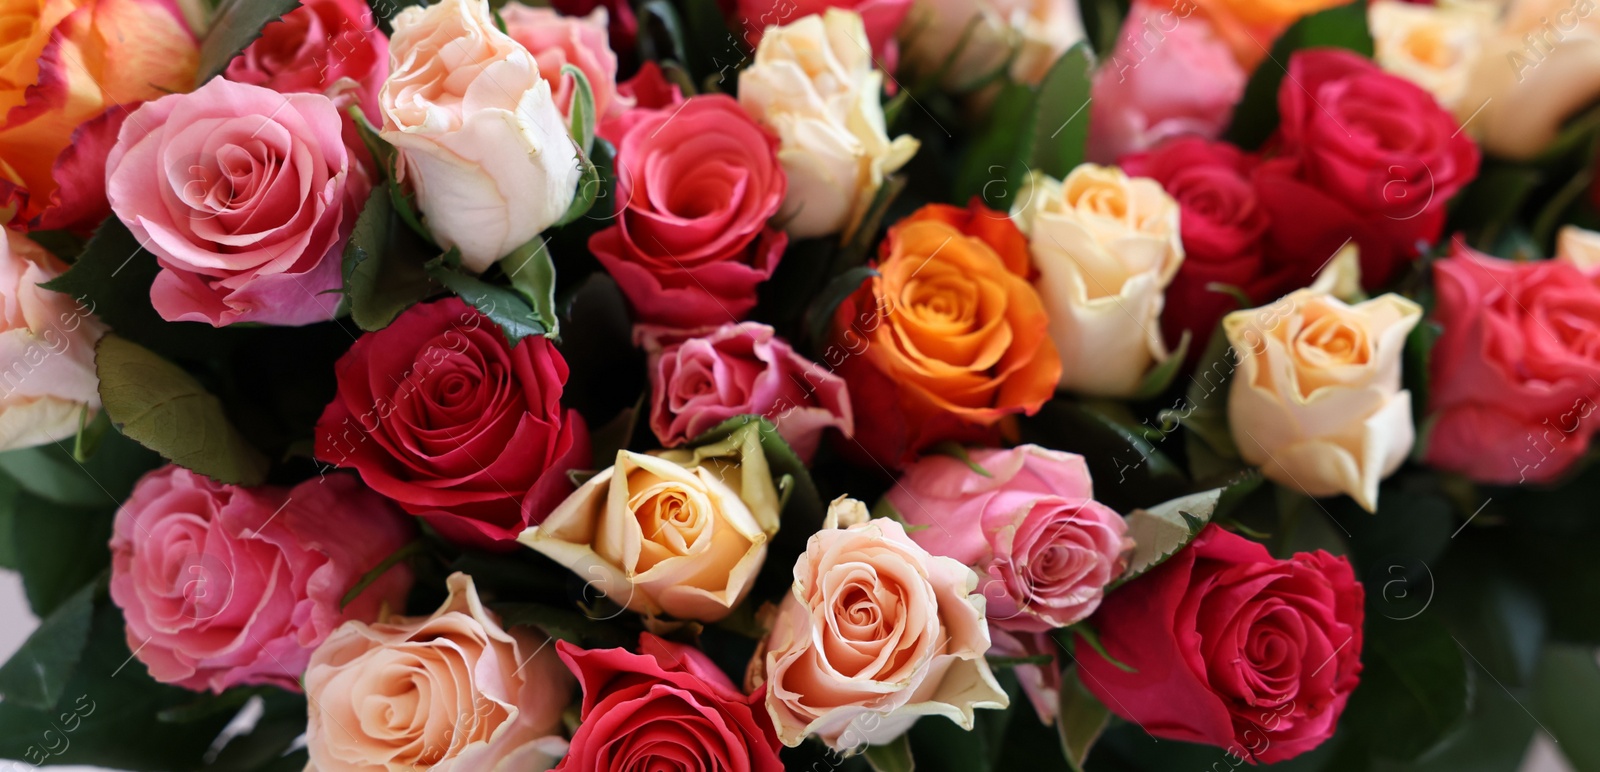 Photo of Bouquet of beautiful roses on light grey background, closeup